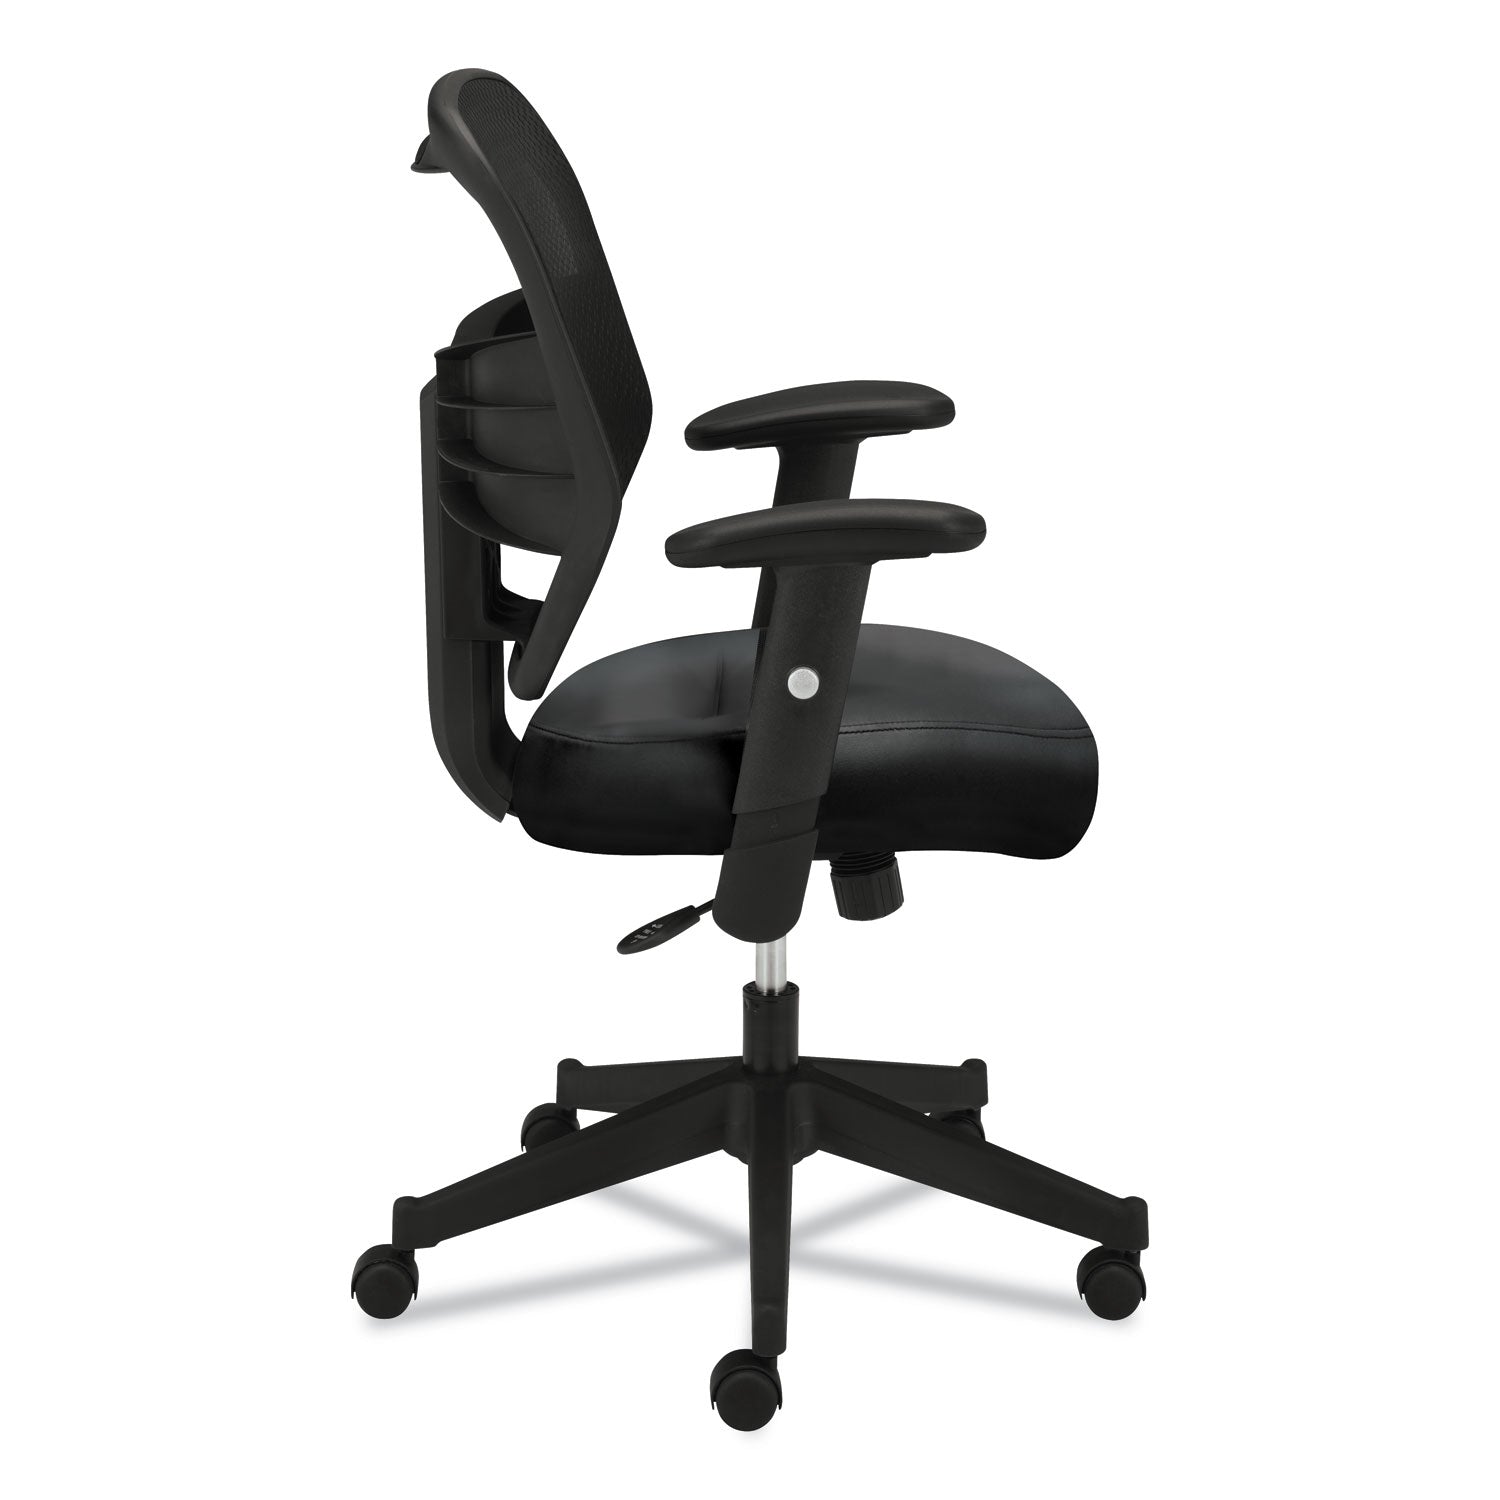 VL531 Mesh High-Back Task Chair with Adjustable Arms, Supports Up to 250 lb, 18" to 22" Seat Height, Black - 